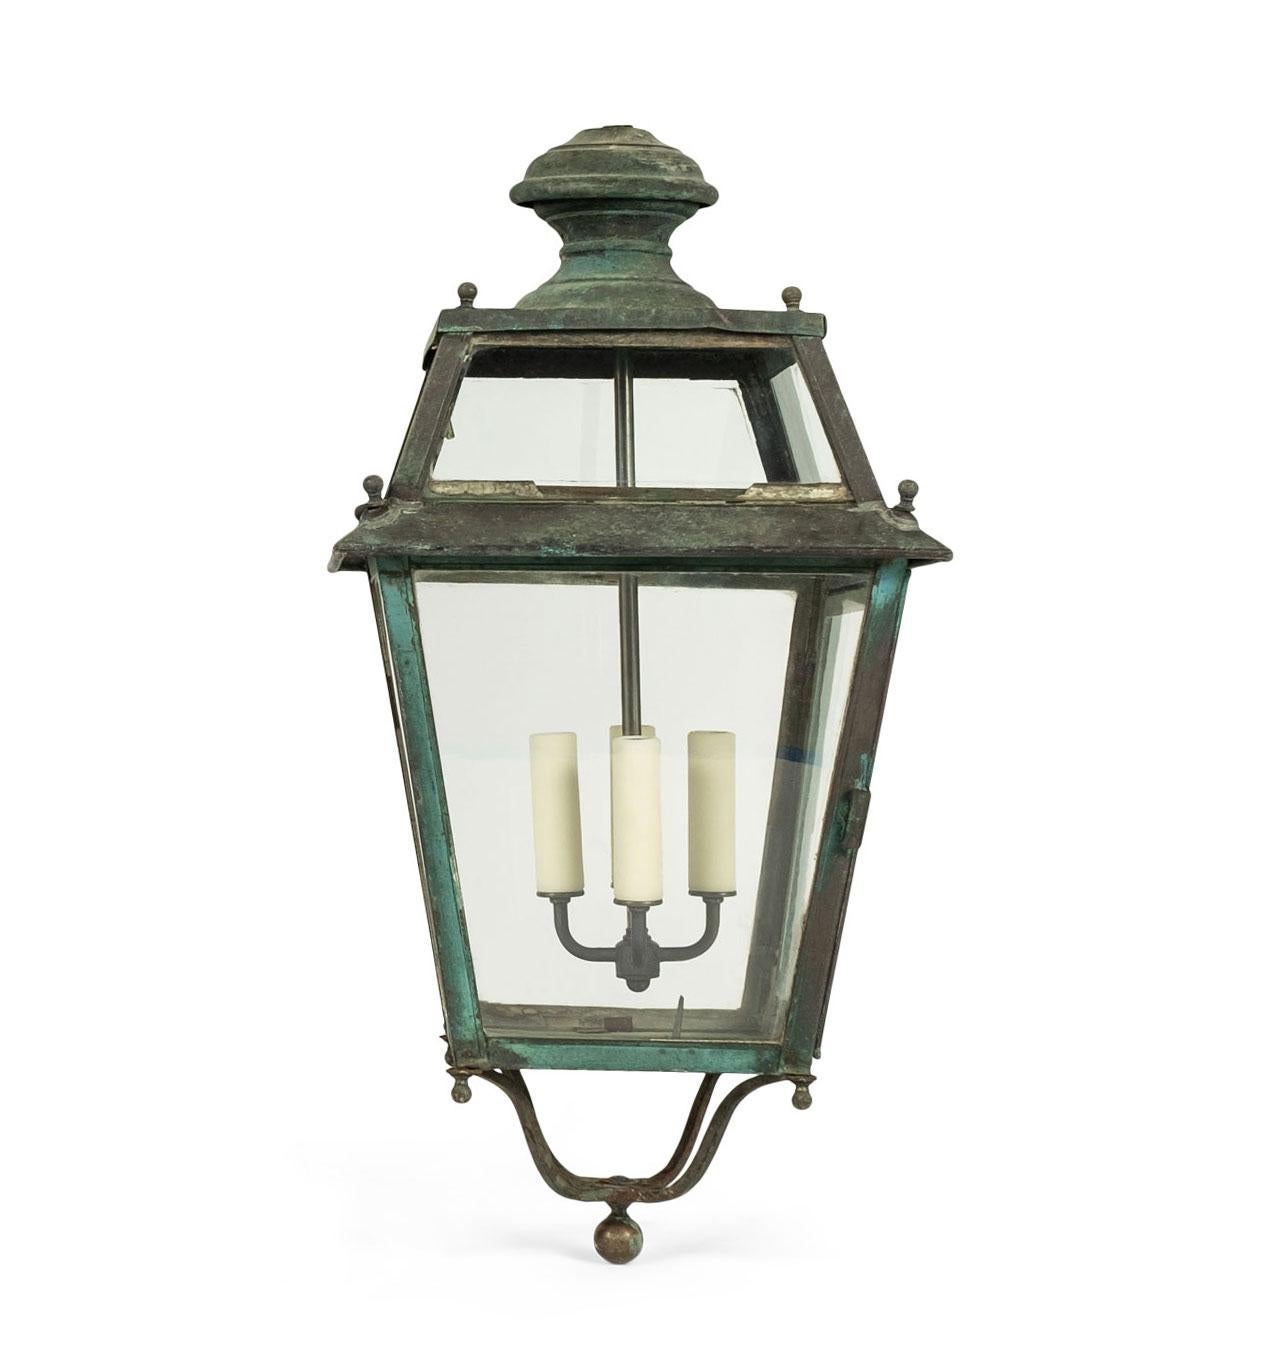 Tole and glass French lanterns dating to the 19th century. Heavy iron frame. Remnants of bluish-verdigris paint. Original wavy glass panels. Newly-wired for use within the USA with four candelabra-size sockets. Includes chain and canopies.